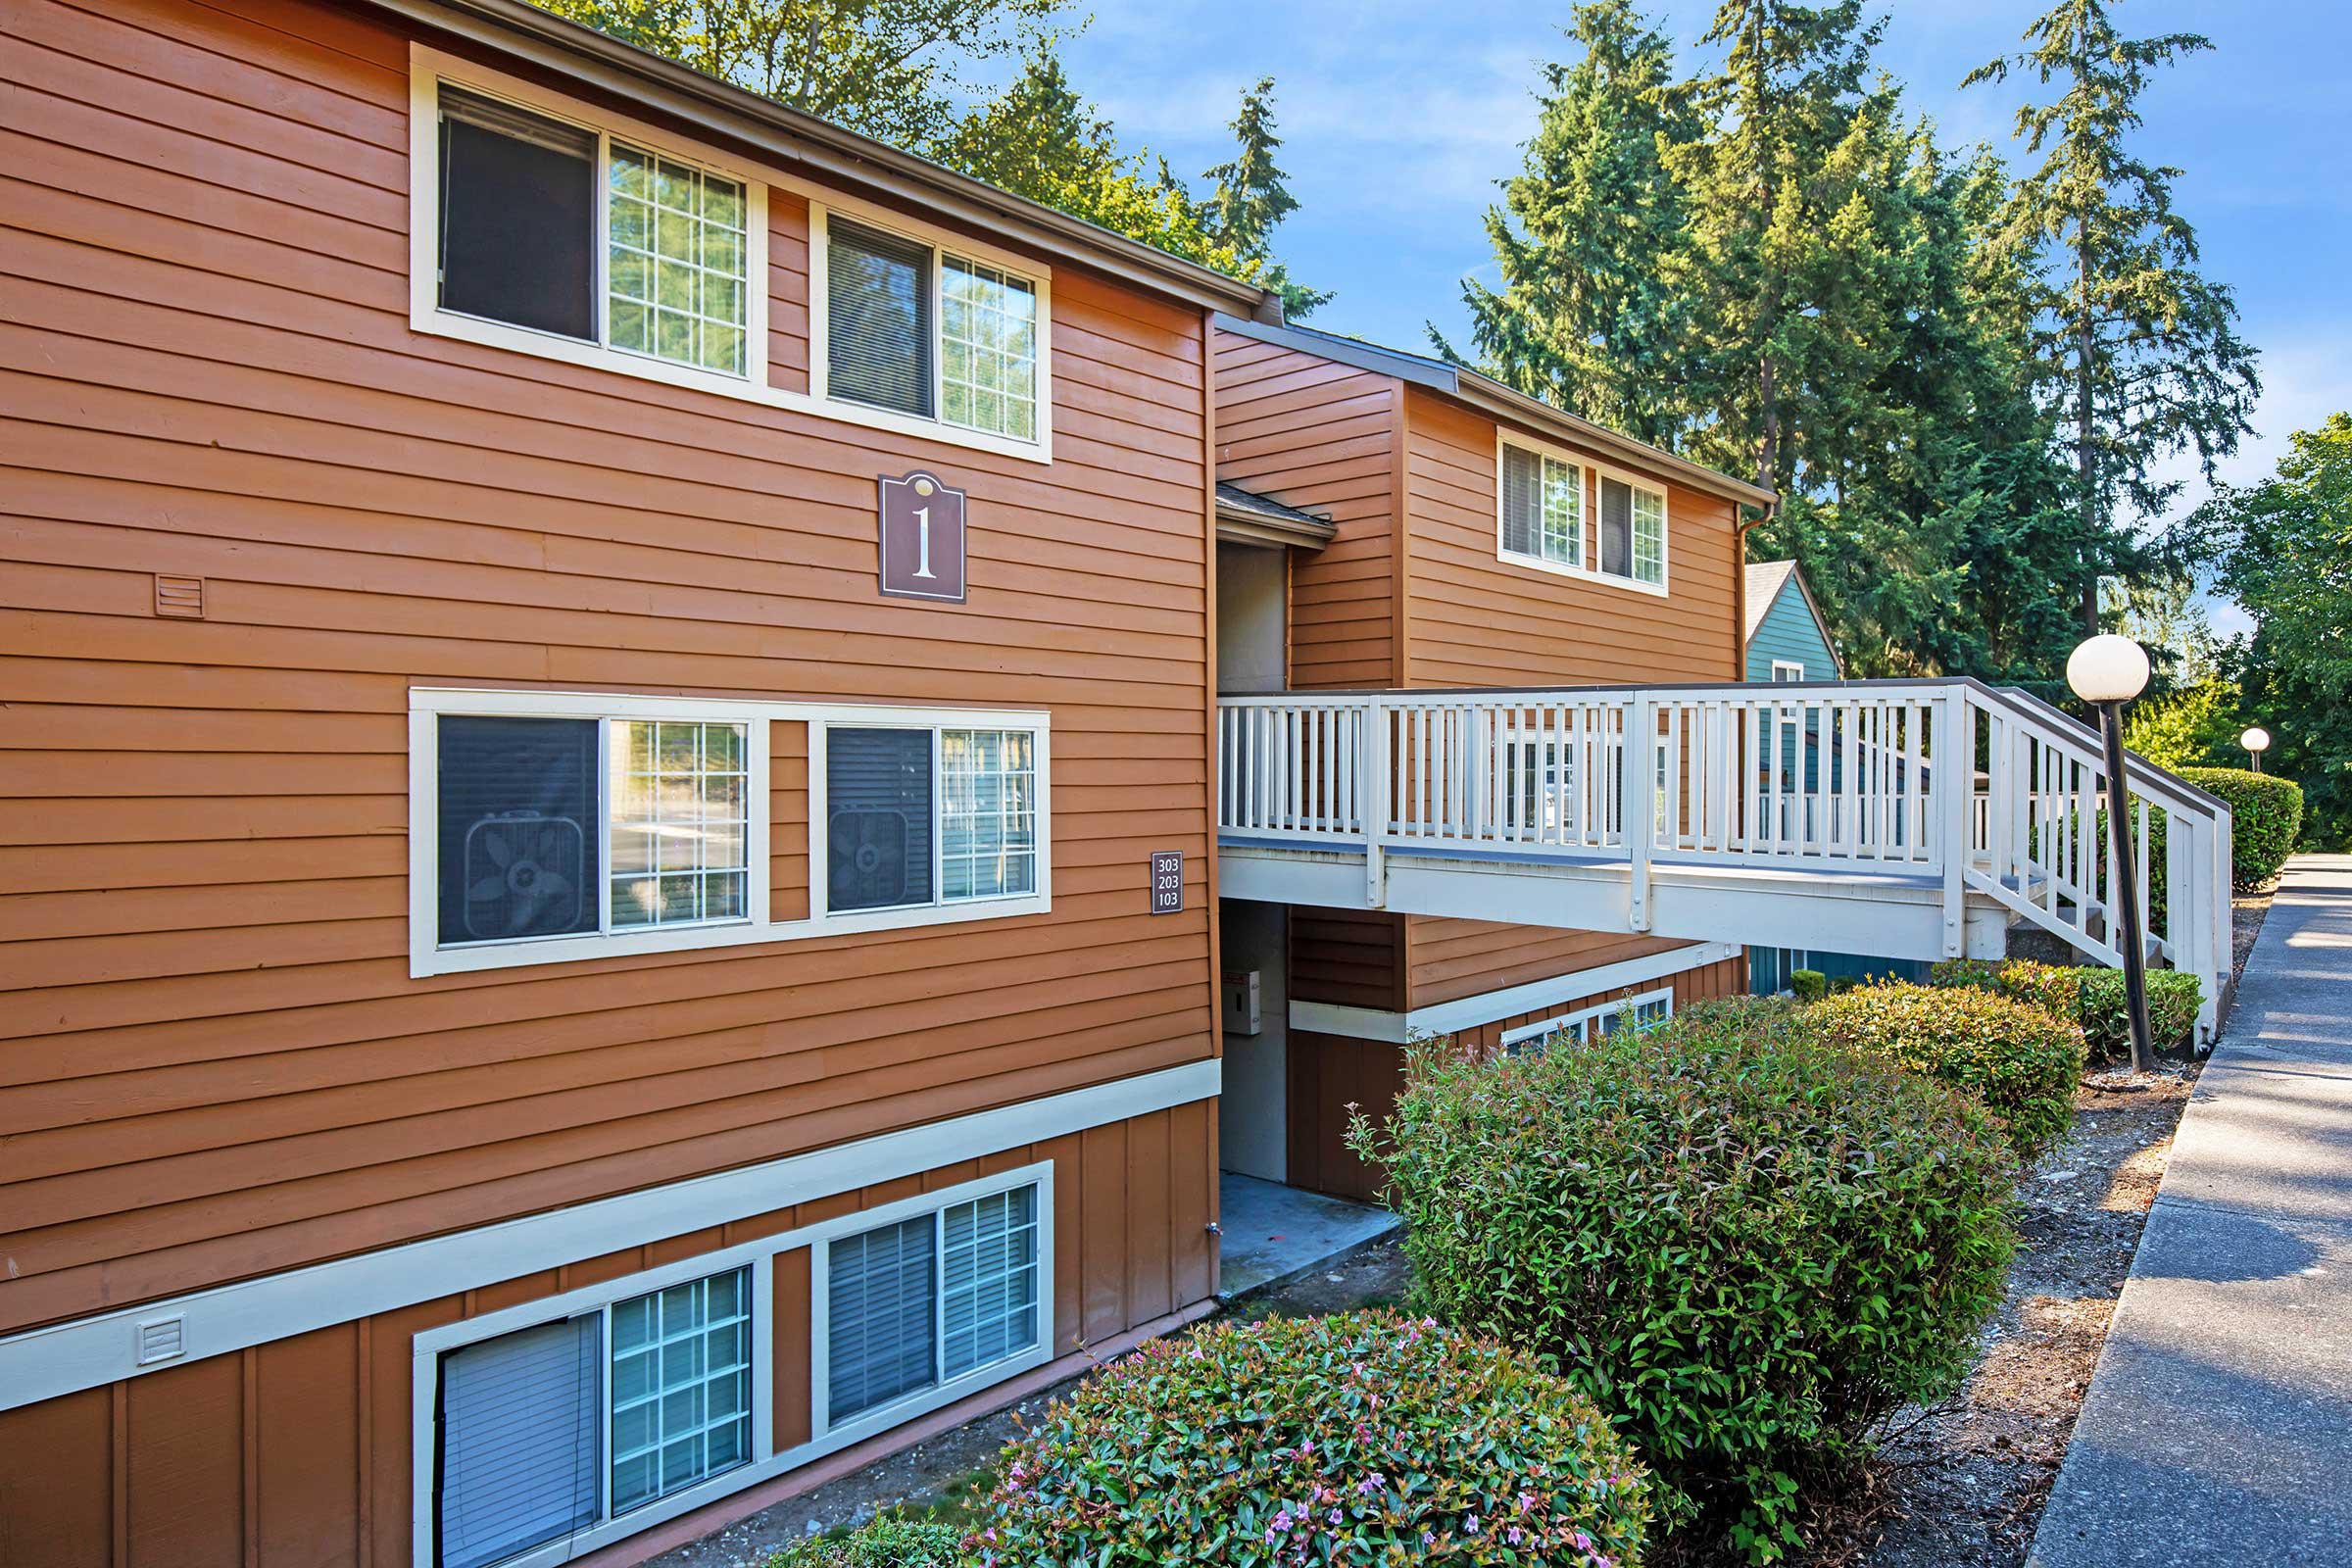 VIEW FEDERAL WAY, WA FROM YOUR BALCONY OR PATIO